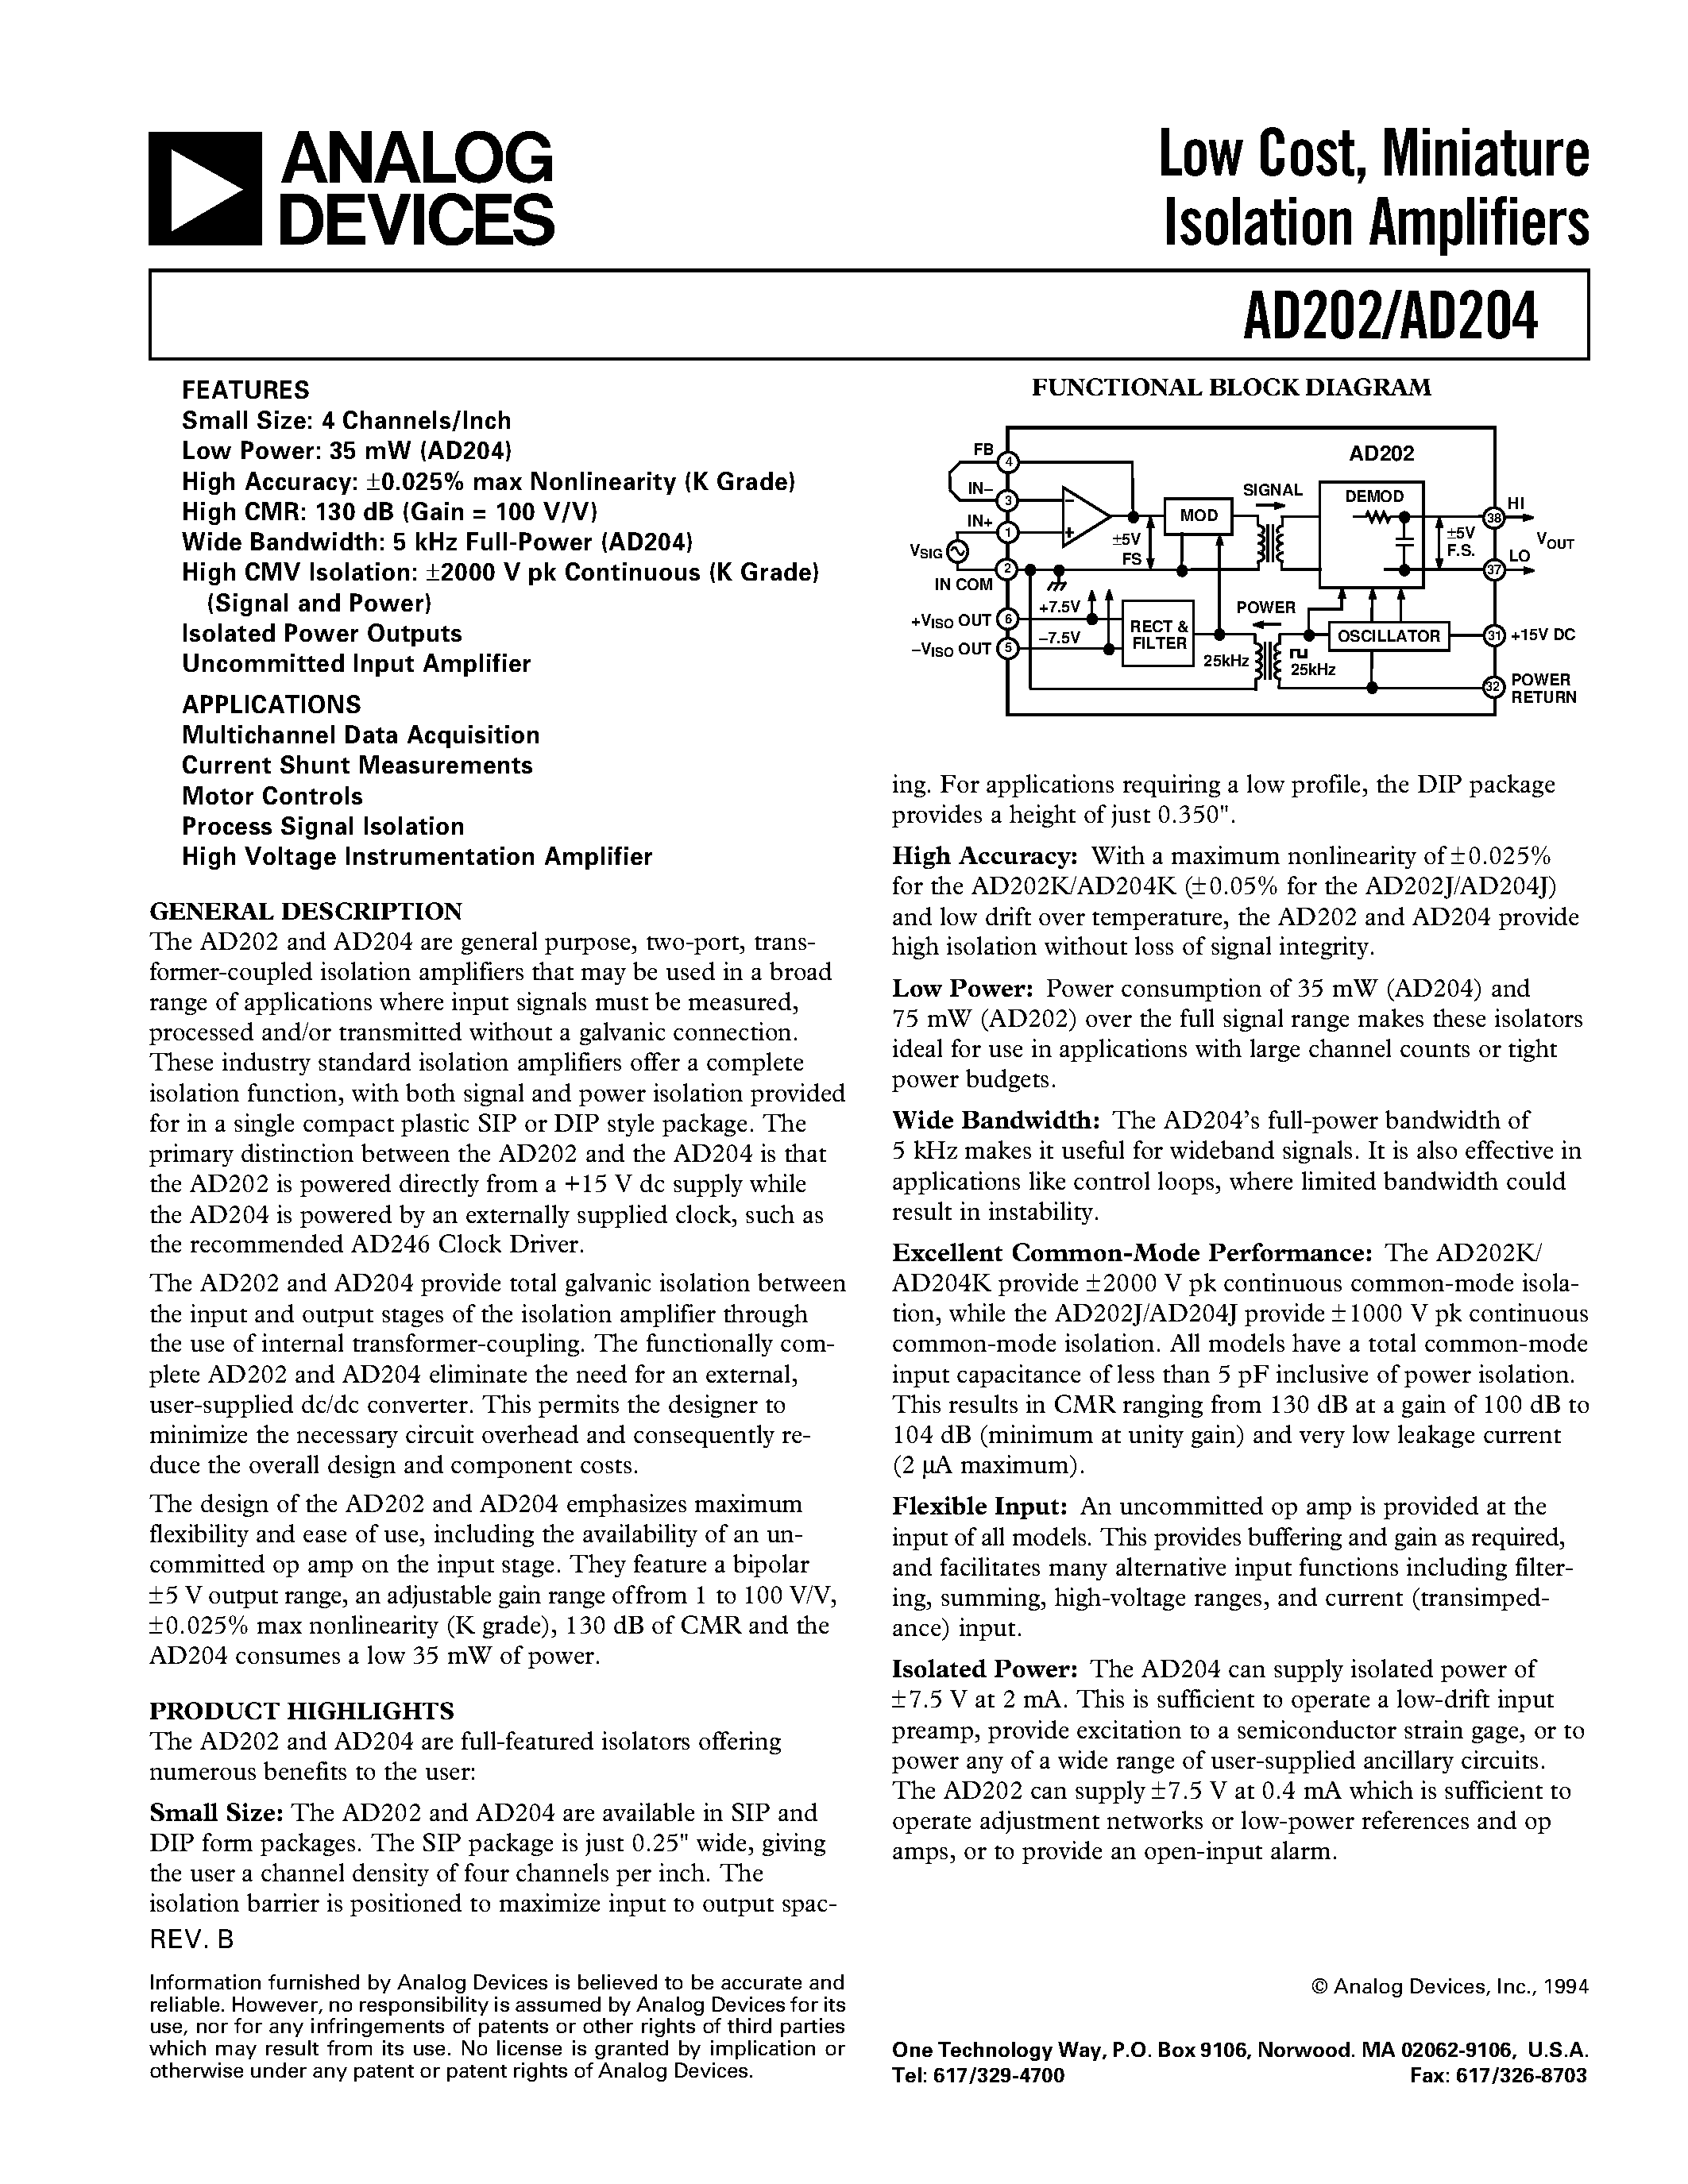 Datasheet AD204K - Low Cost/ Miniature Isolation Amplifiers page 1